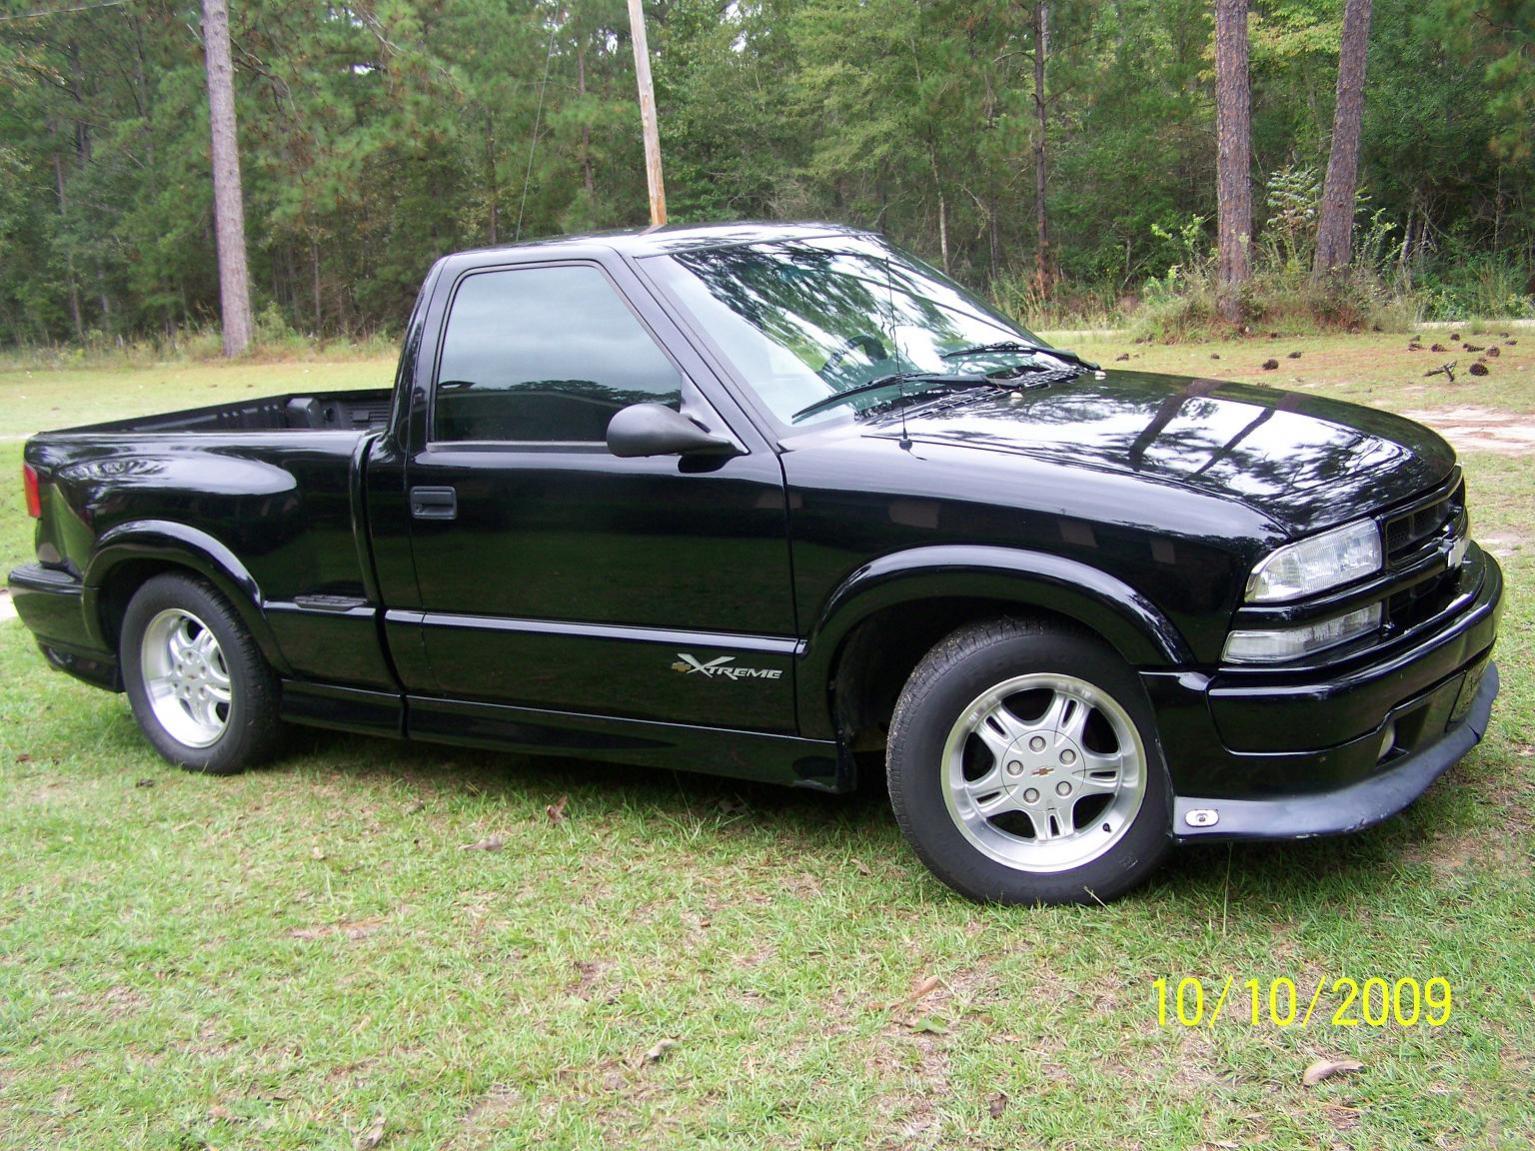 Chevy S10 Extreme For Sale - dReferenz Blog